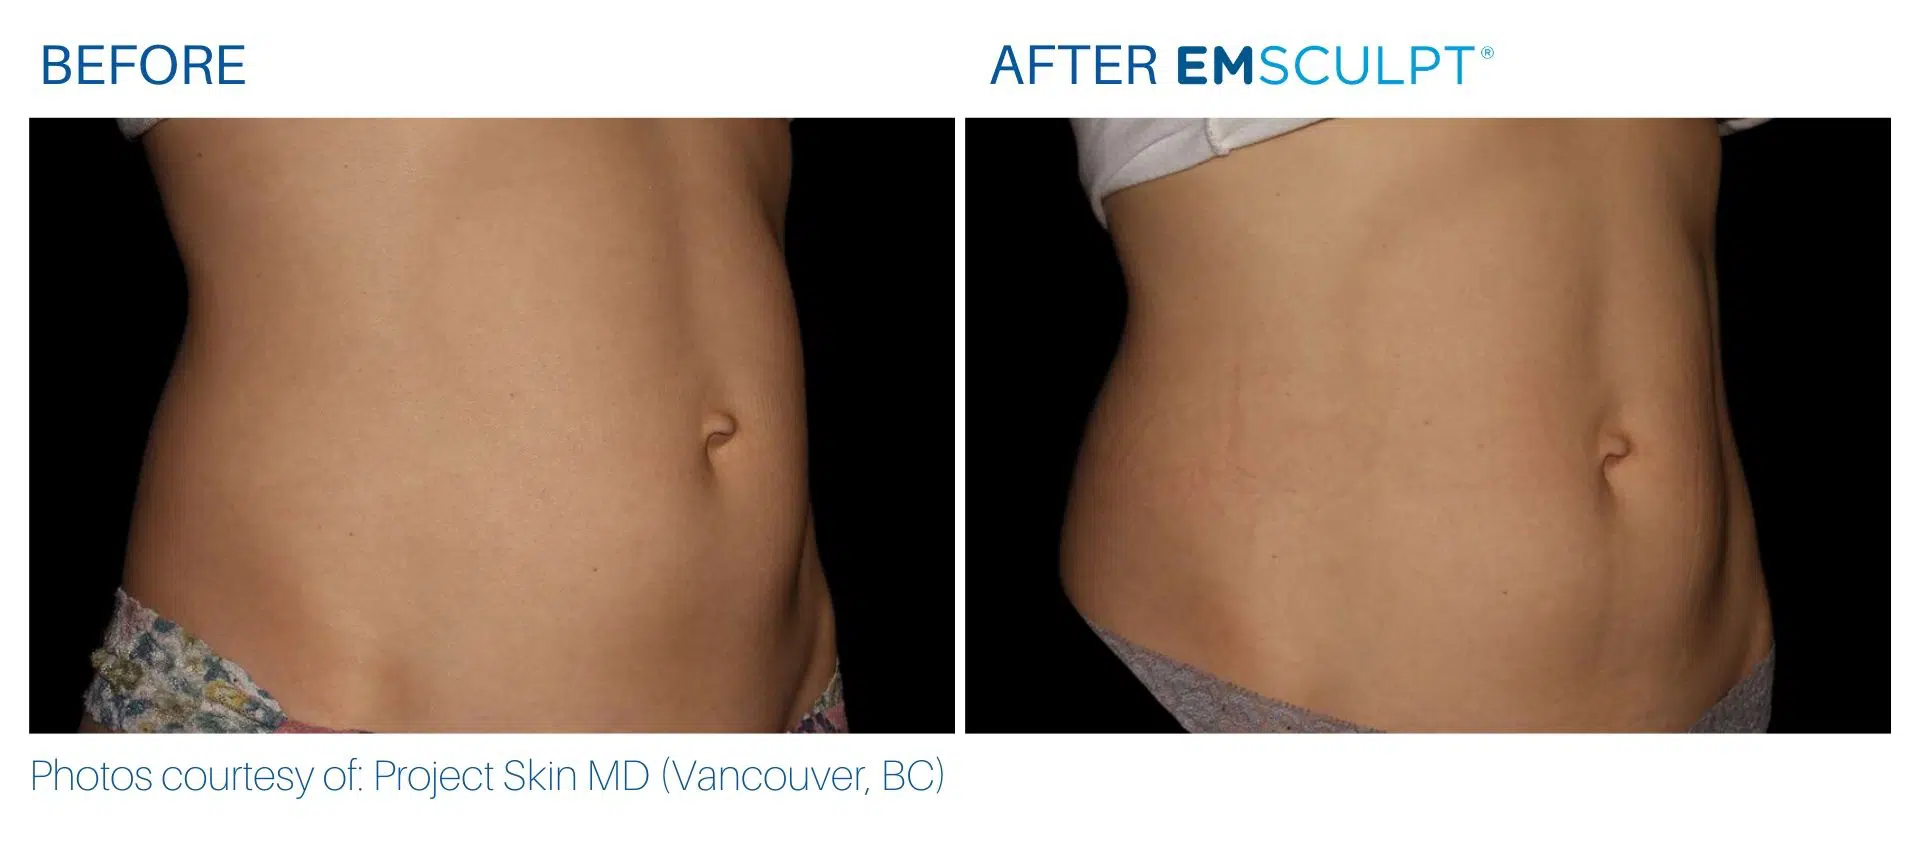 Emsculpt before and after results Body Morph MD